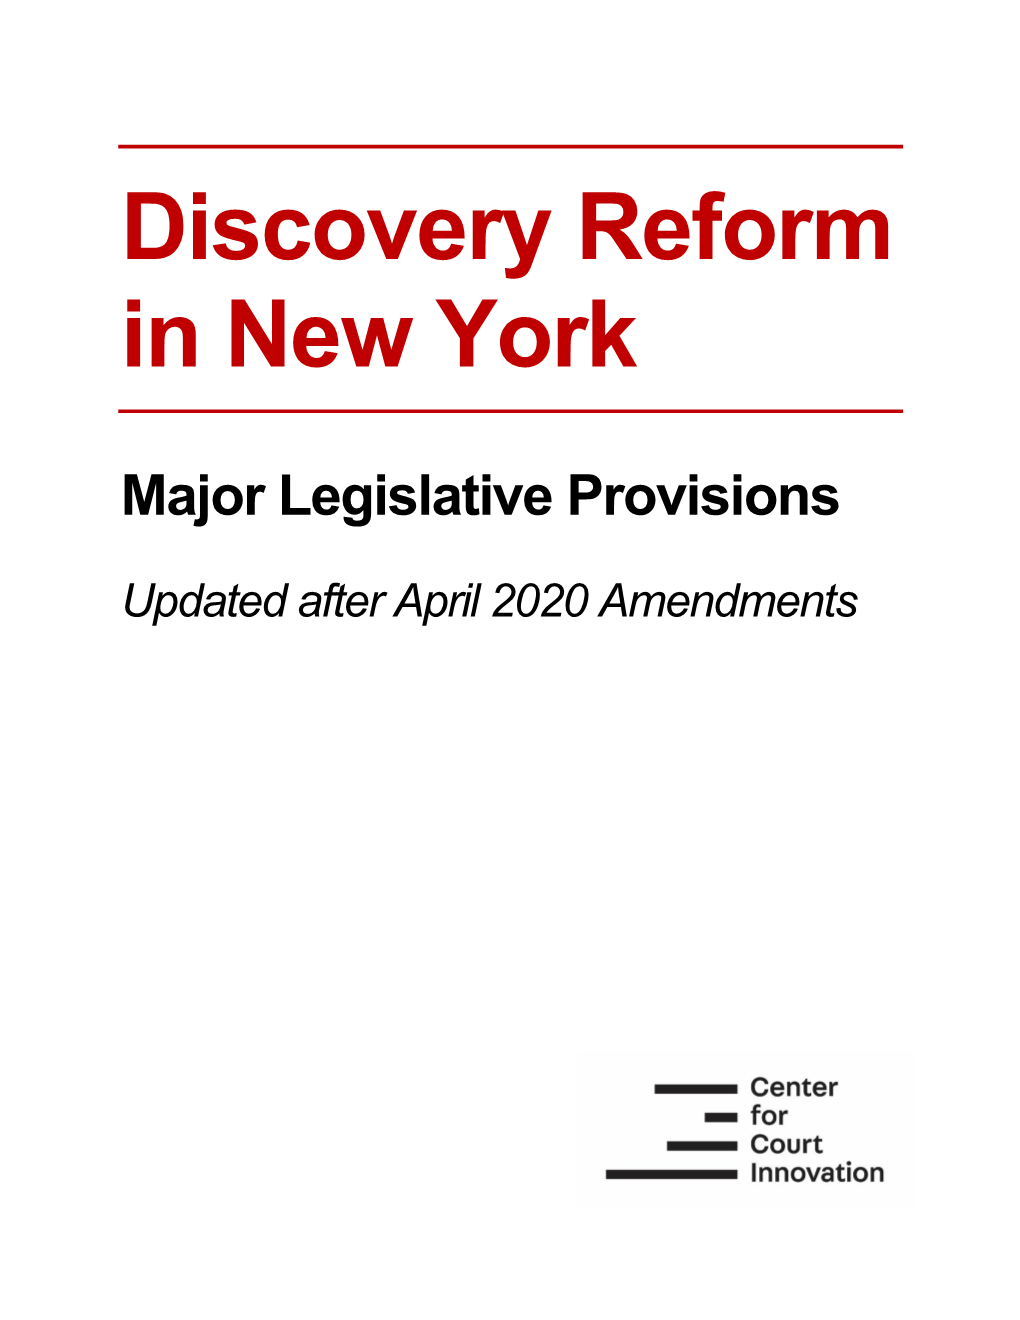 Discovery Reform in New York